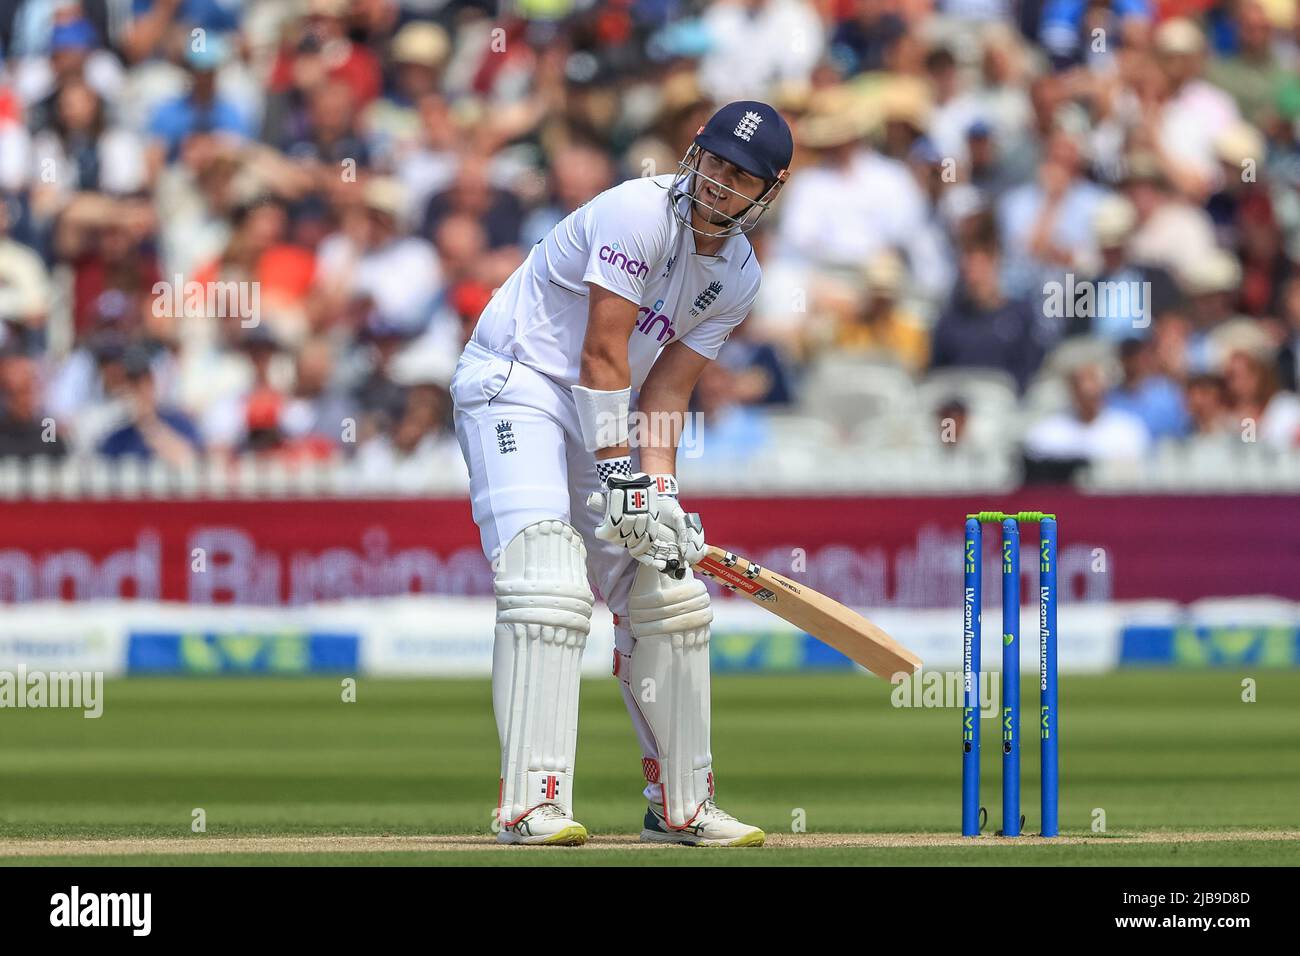 Alex Lees of England during the game Stock Photo